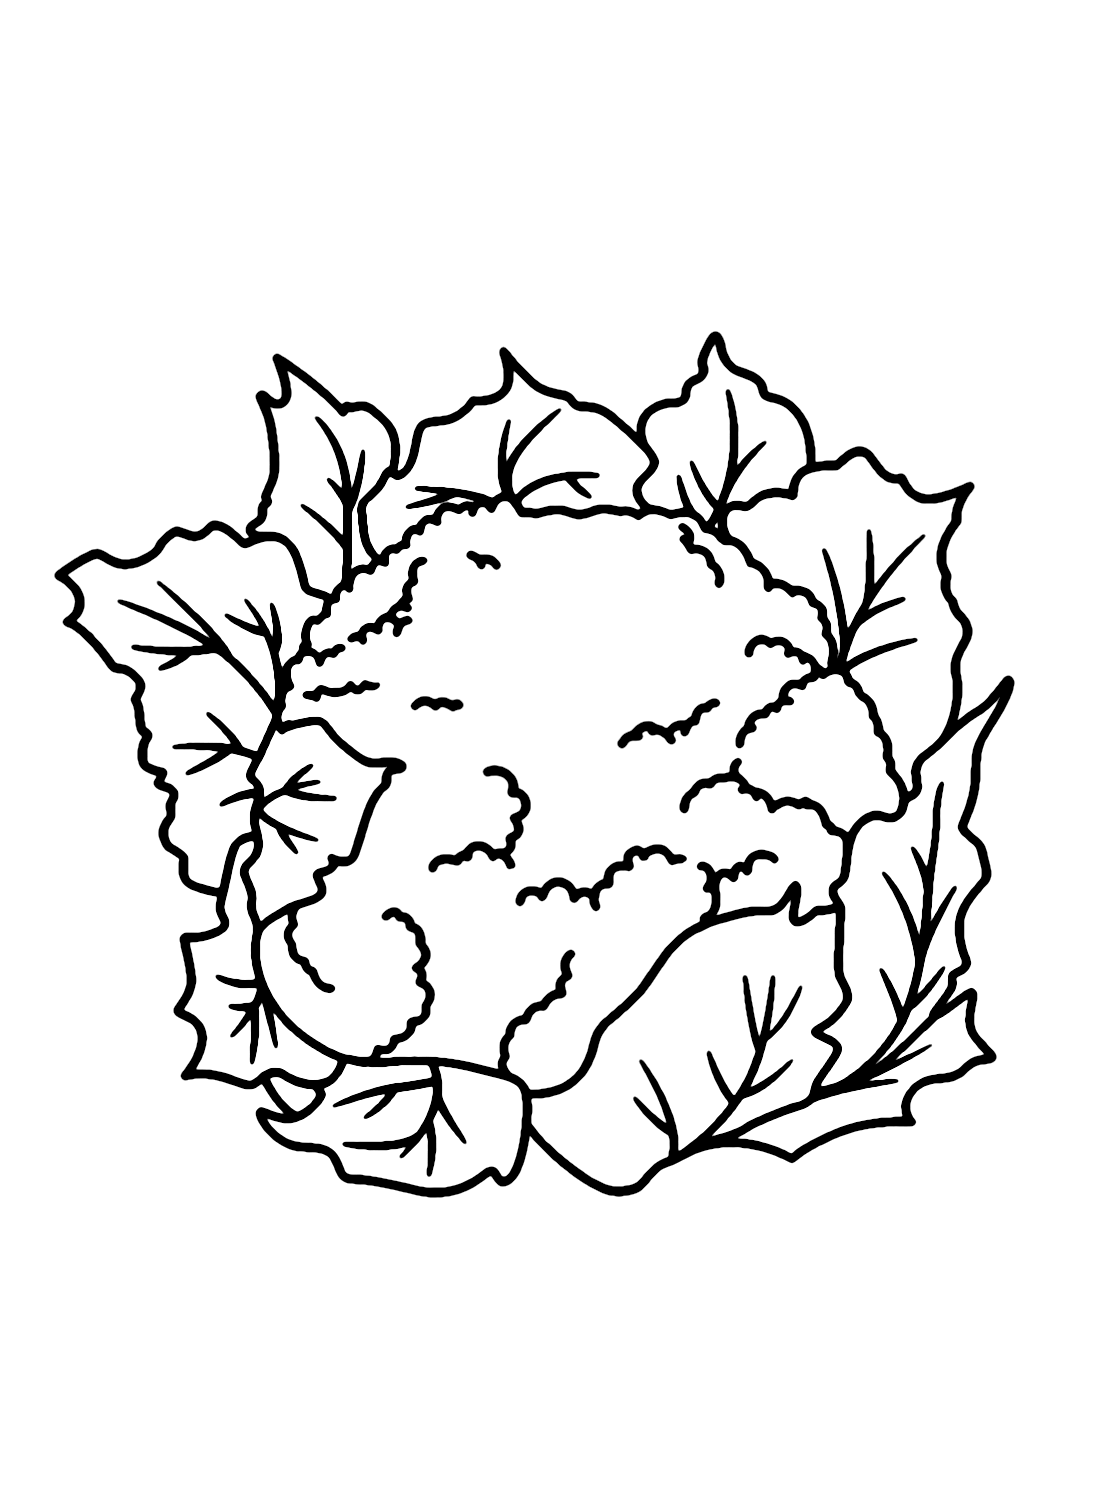 Cauliflower for Kids Coloring Page